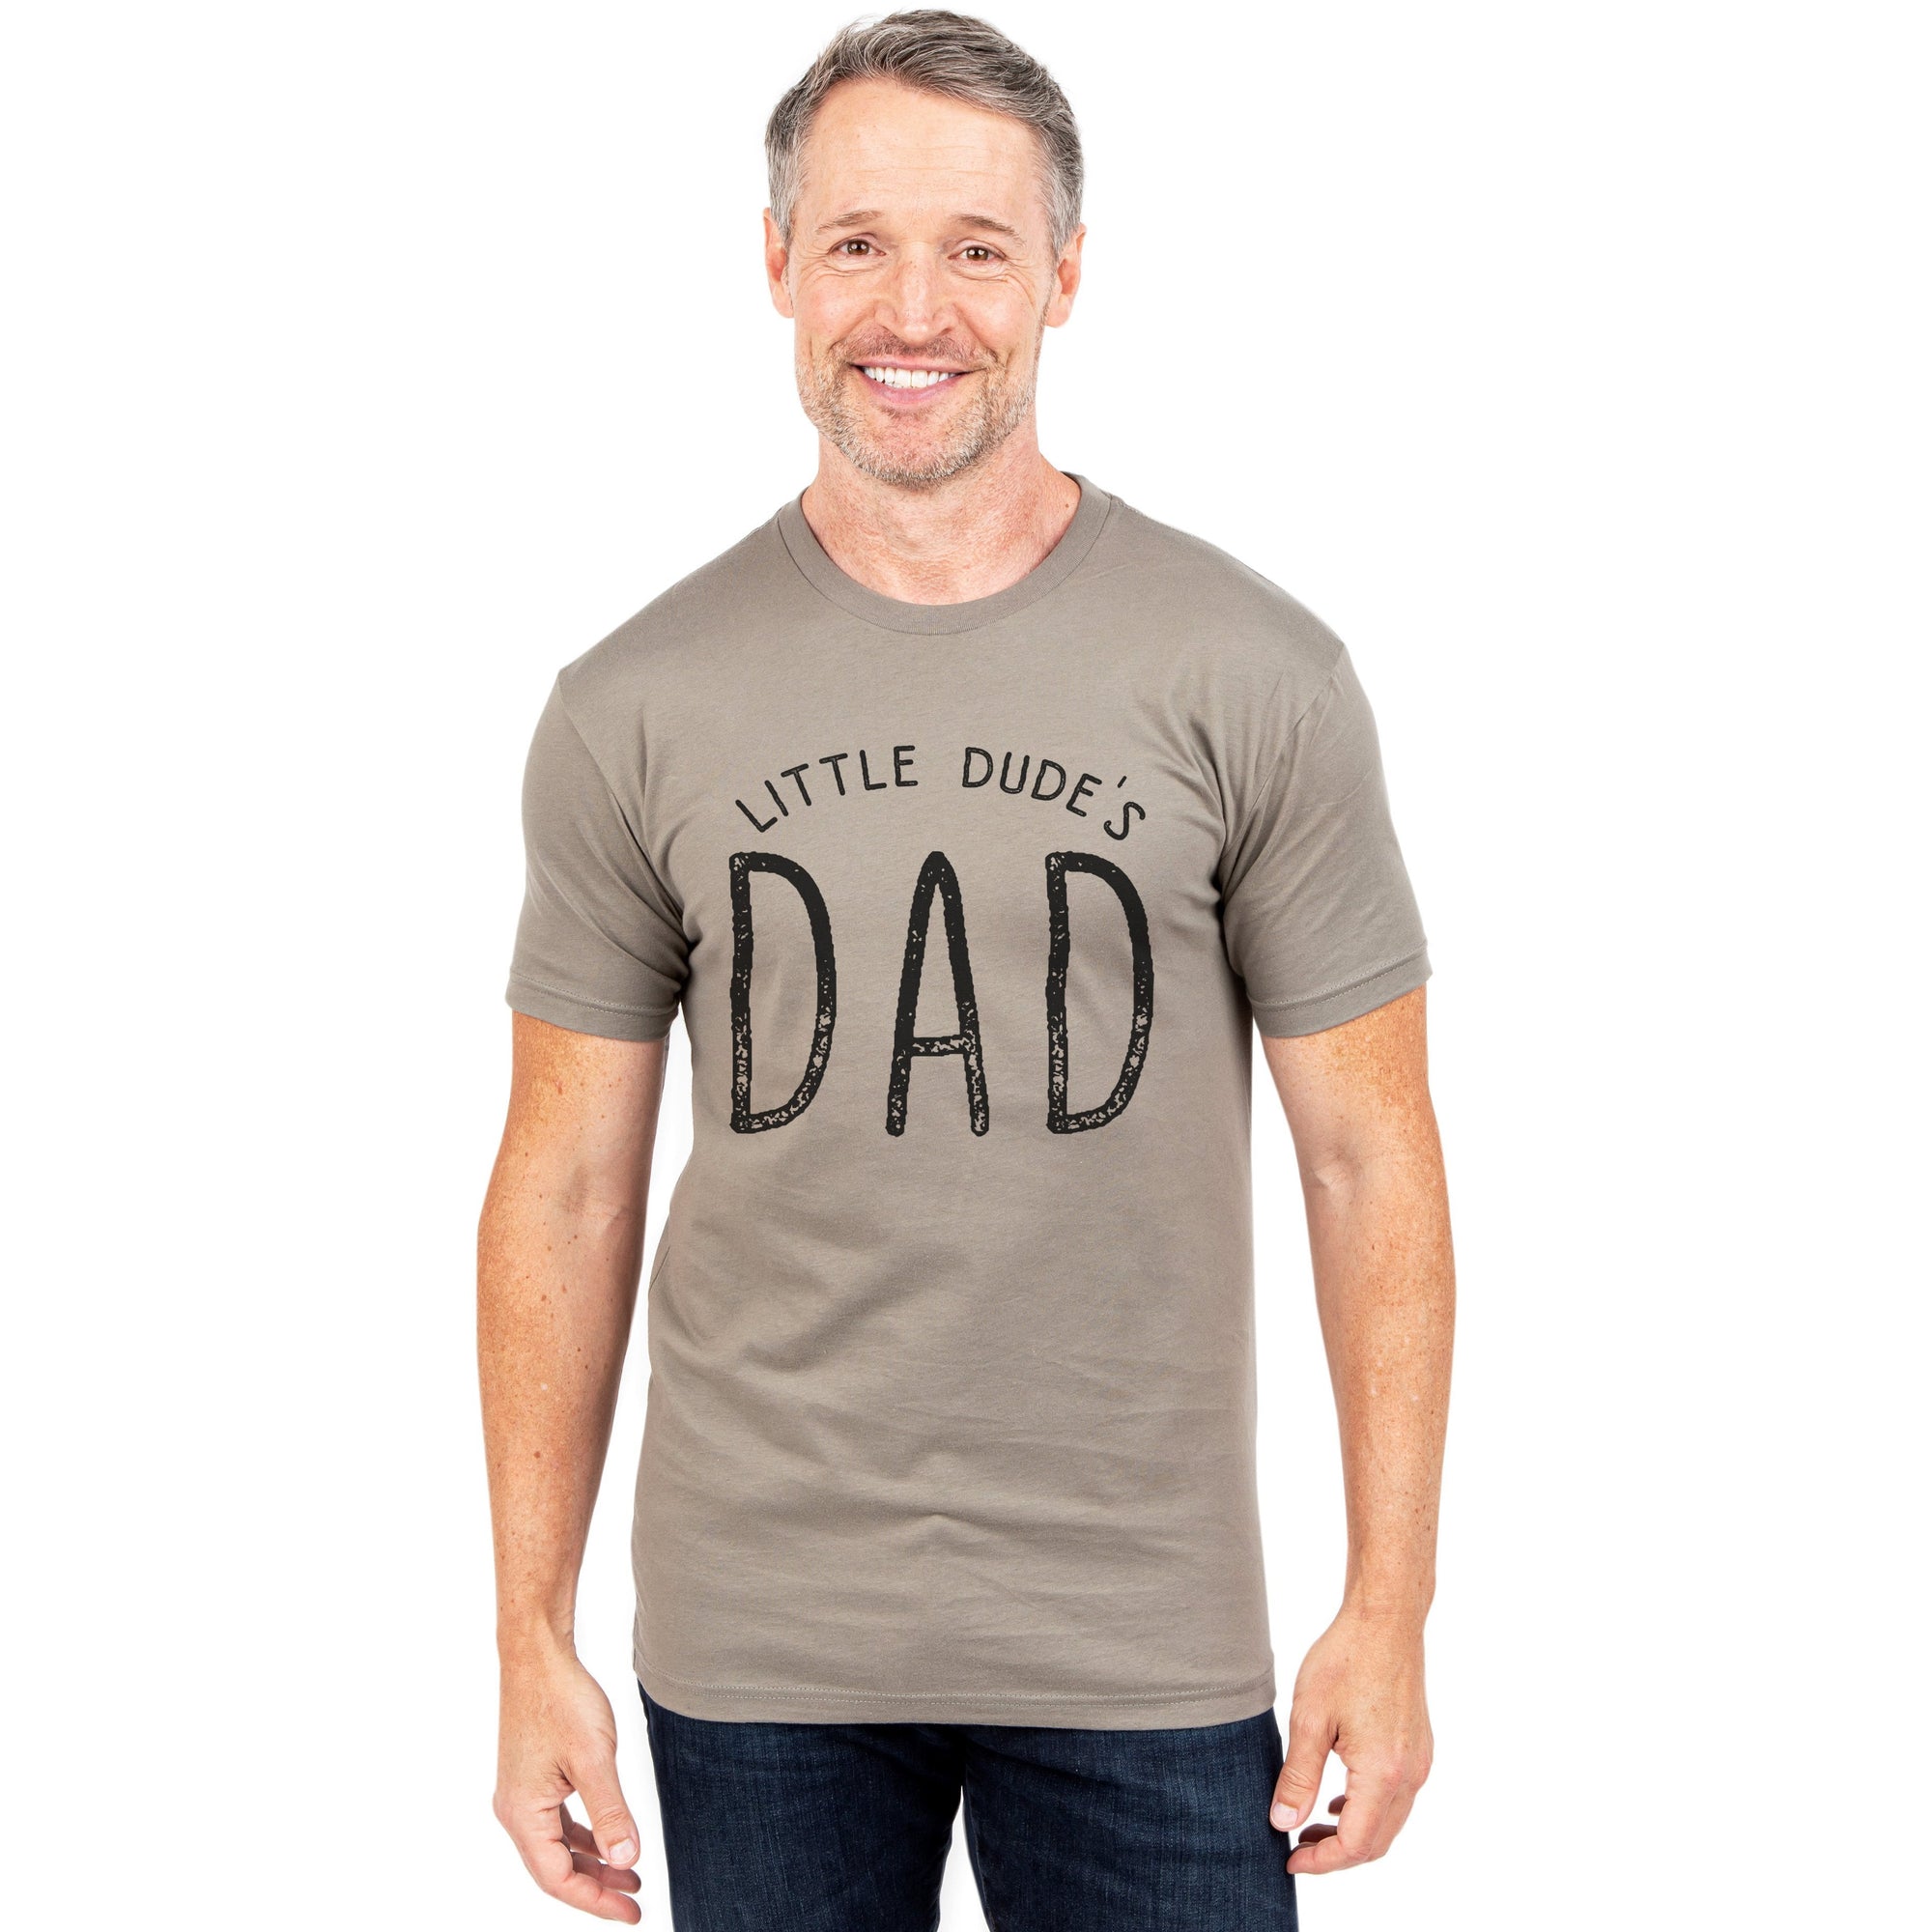 Lil Dude's Dad Military Grey Printed Graphic Men's Crew T-Shirt Tee Model